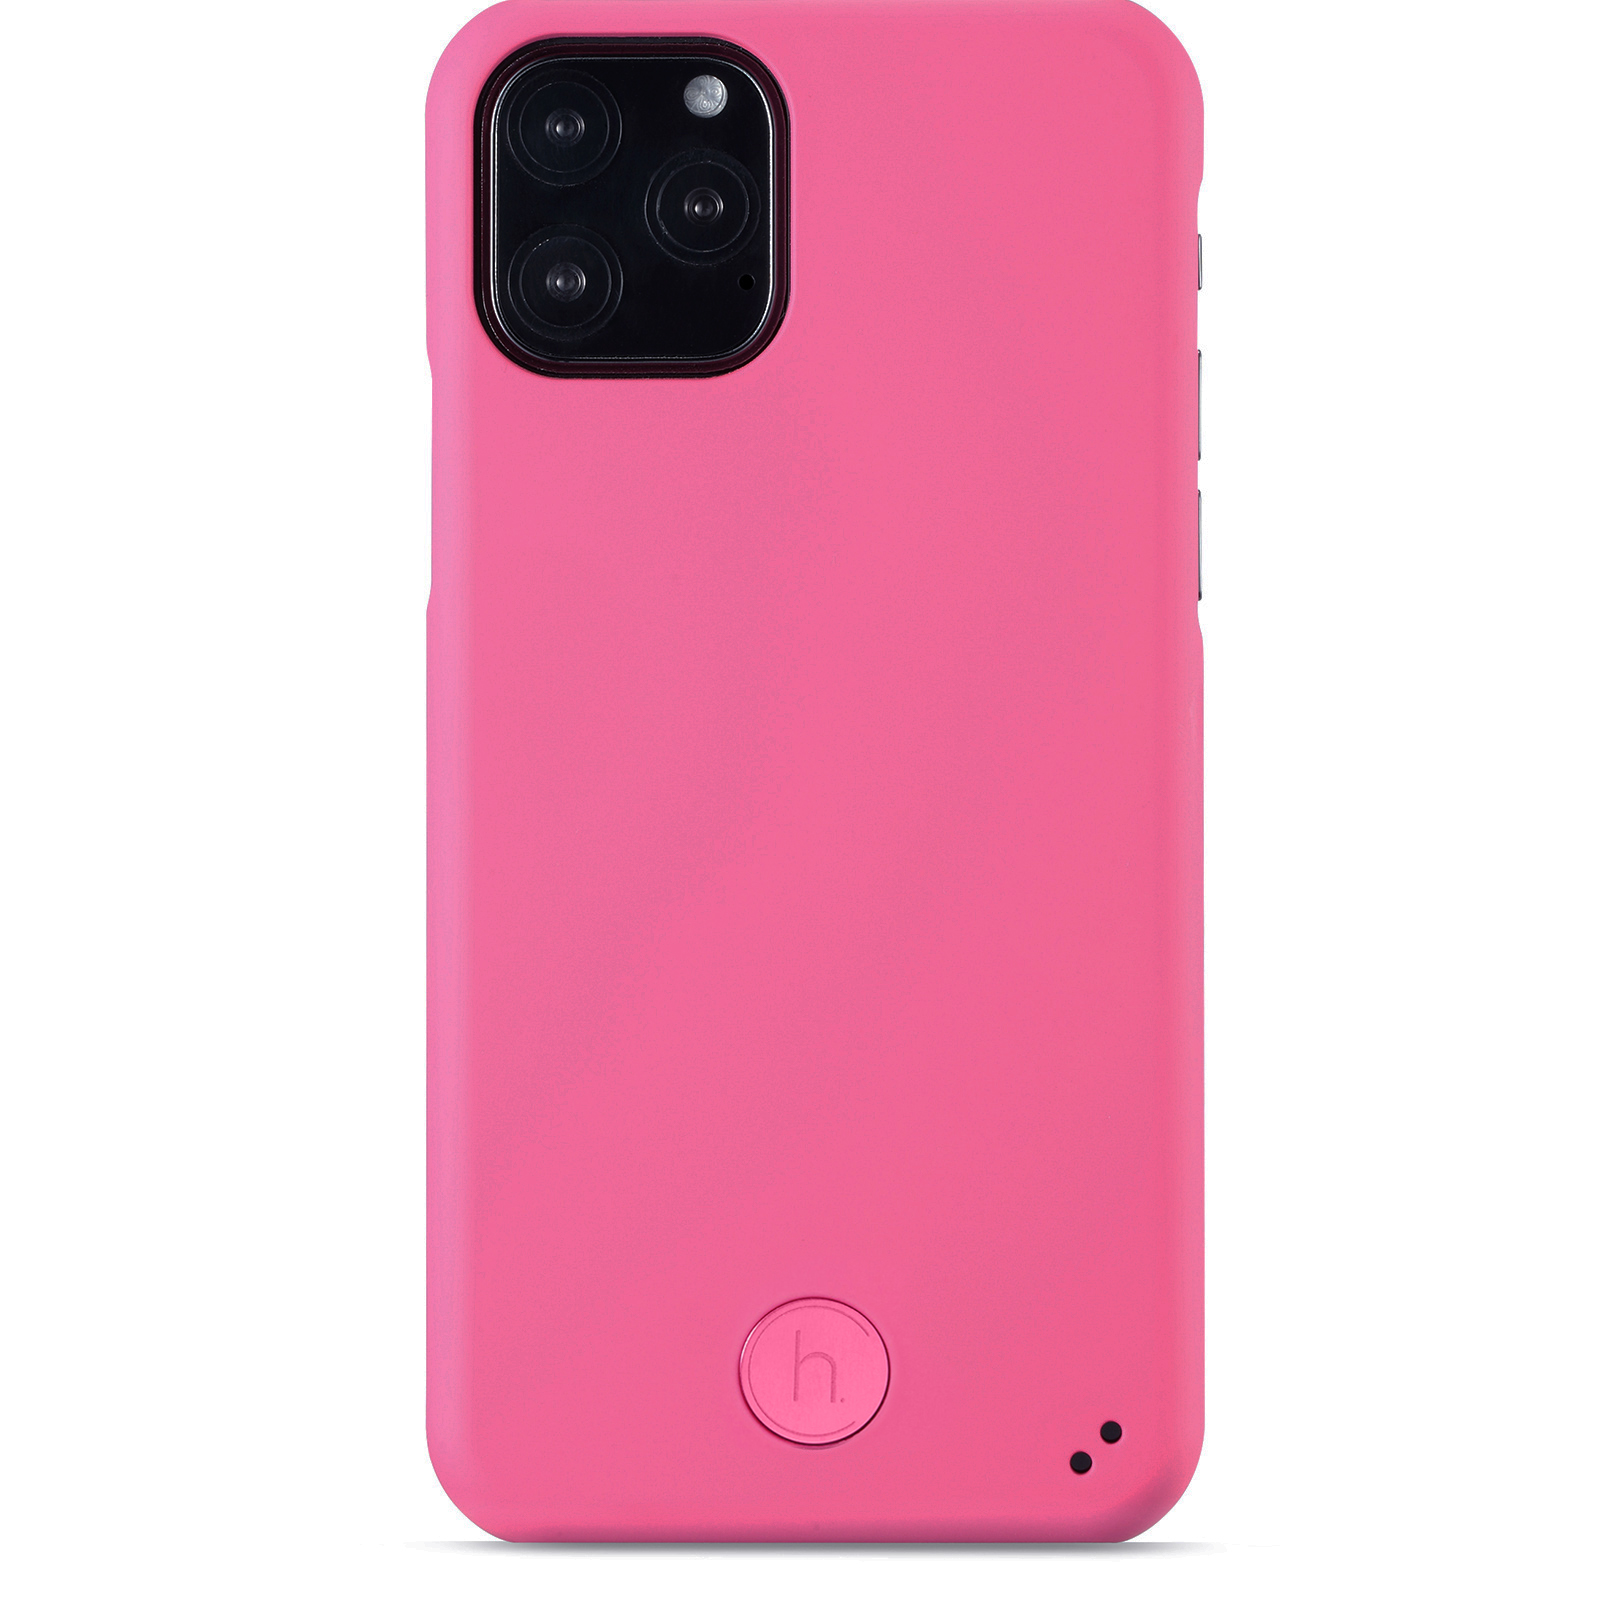 iPhone X/Xs/11 Pro, case connect, fluorescent pink